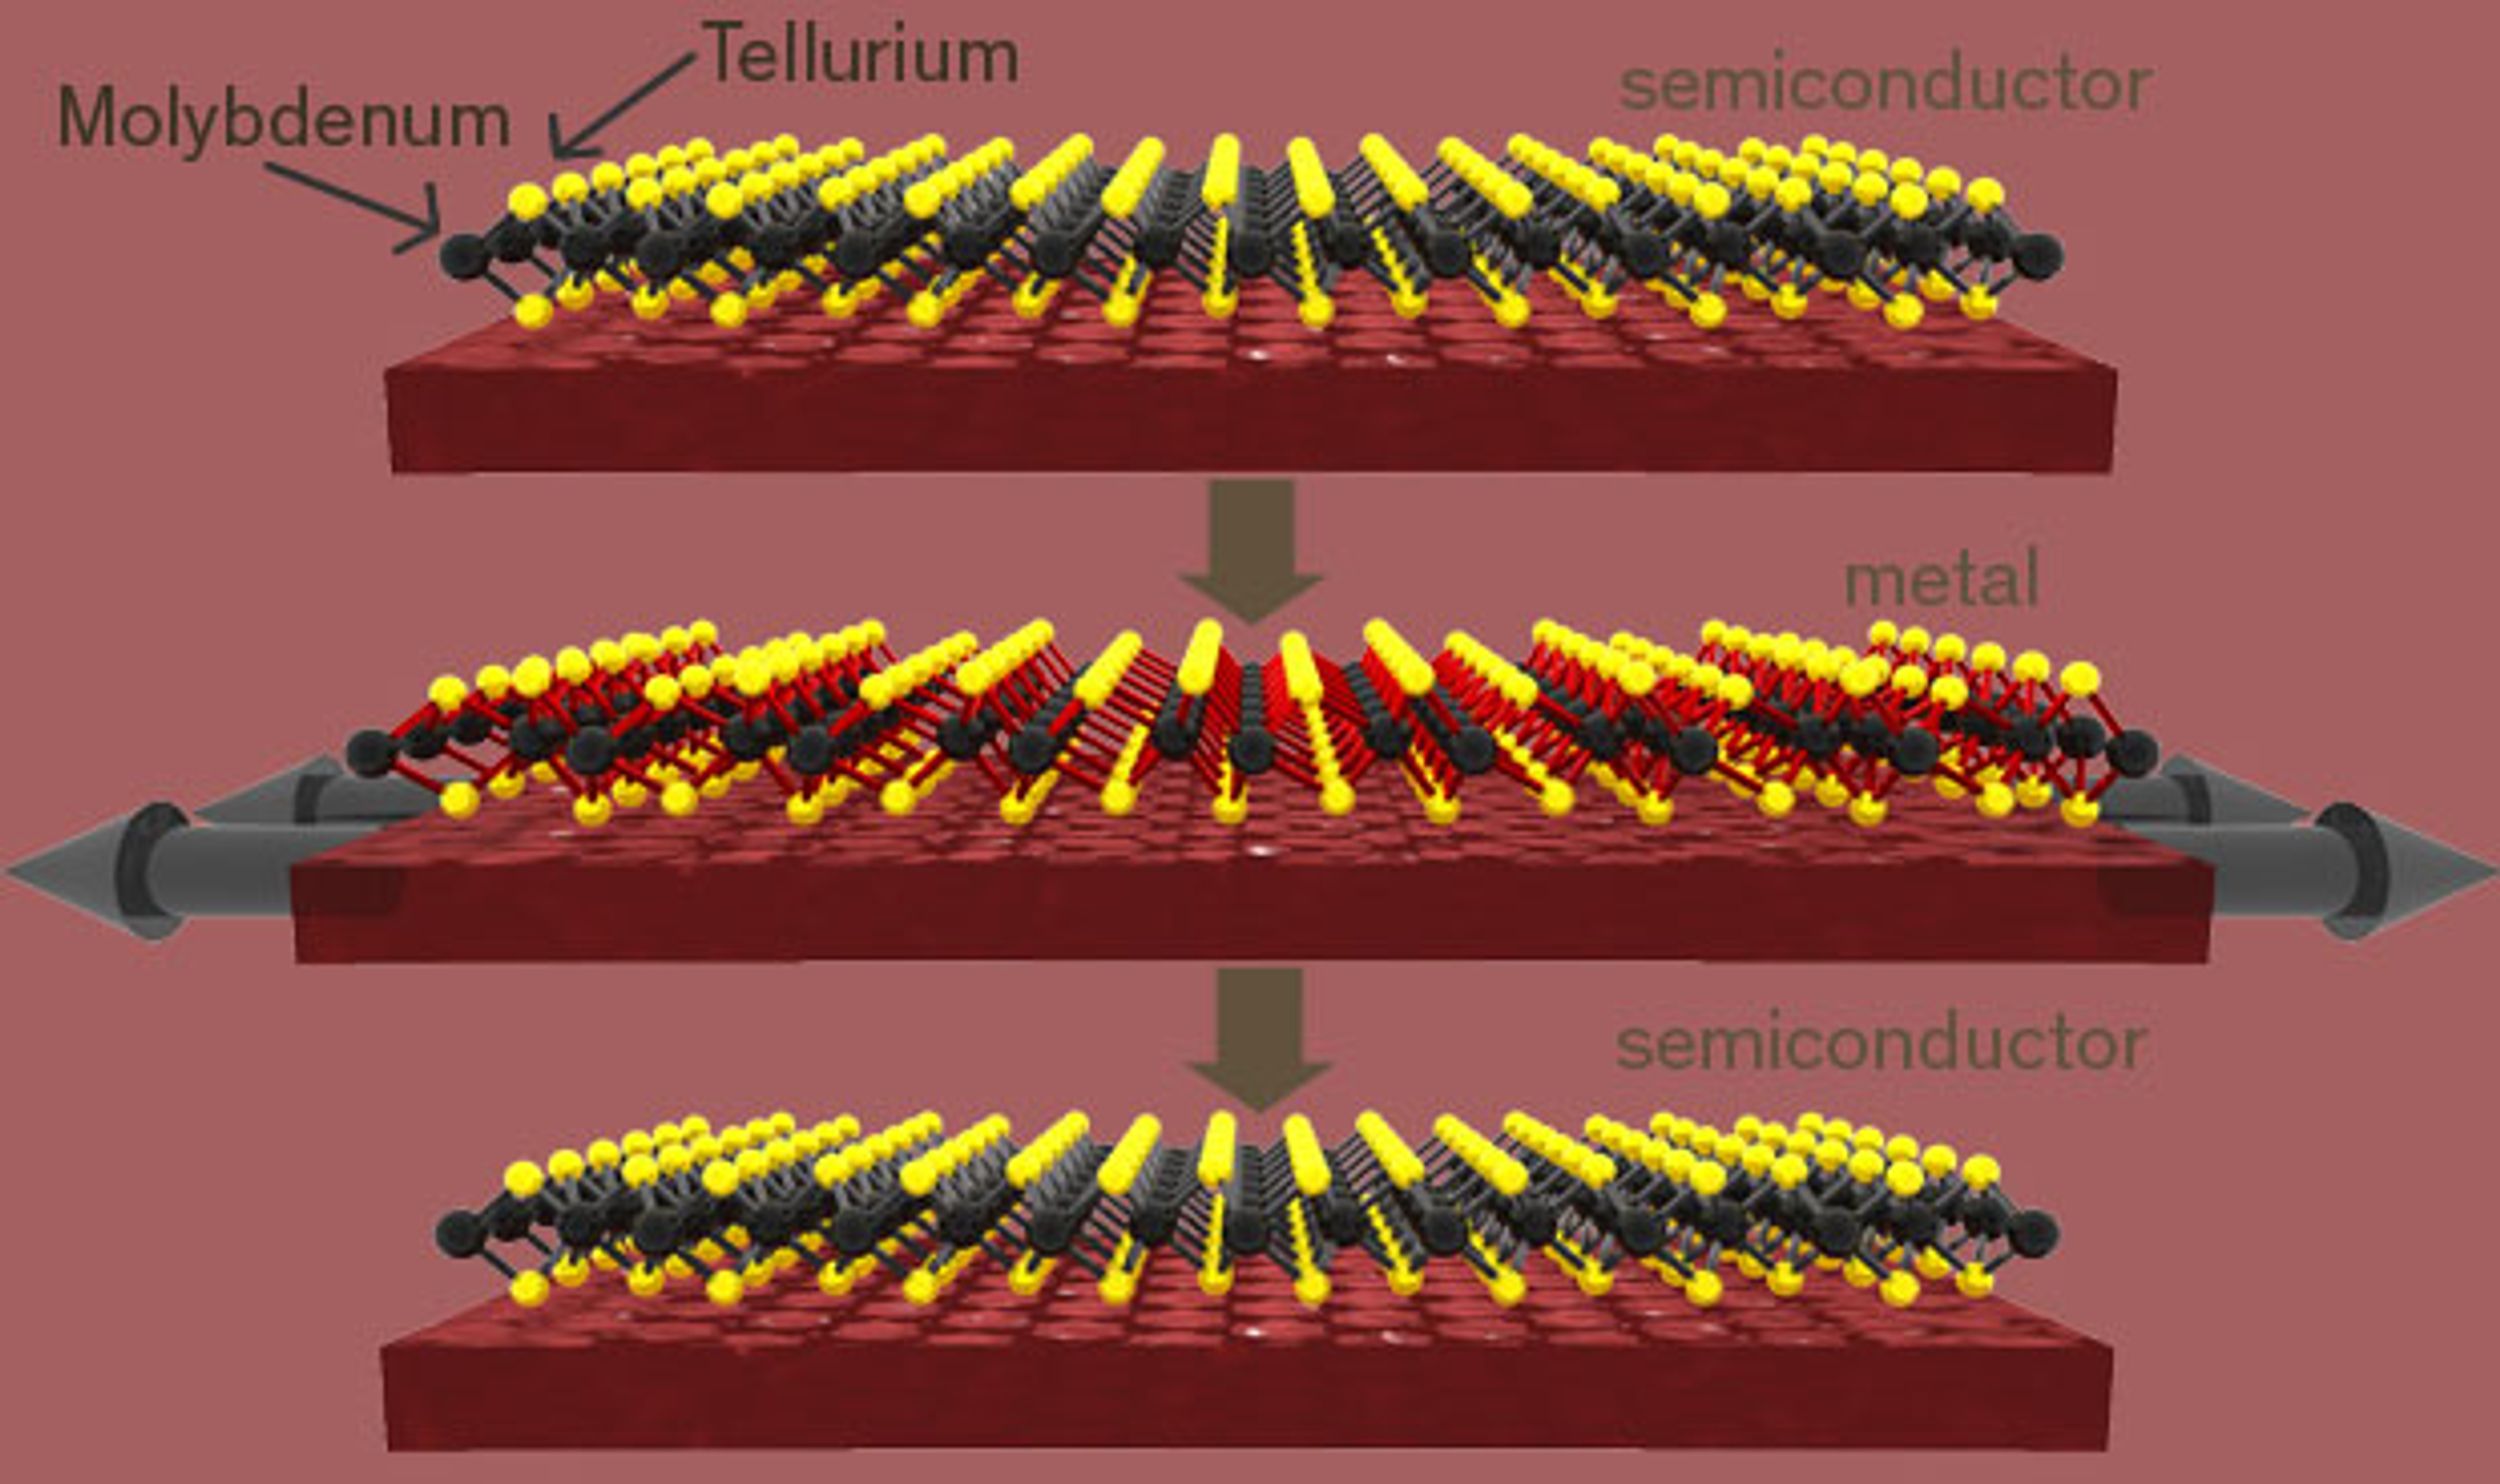 Three-Atom Thick Material Switches Between a Conductor and an Insulator When Tugged